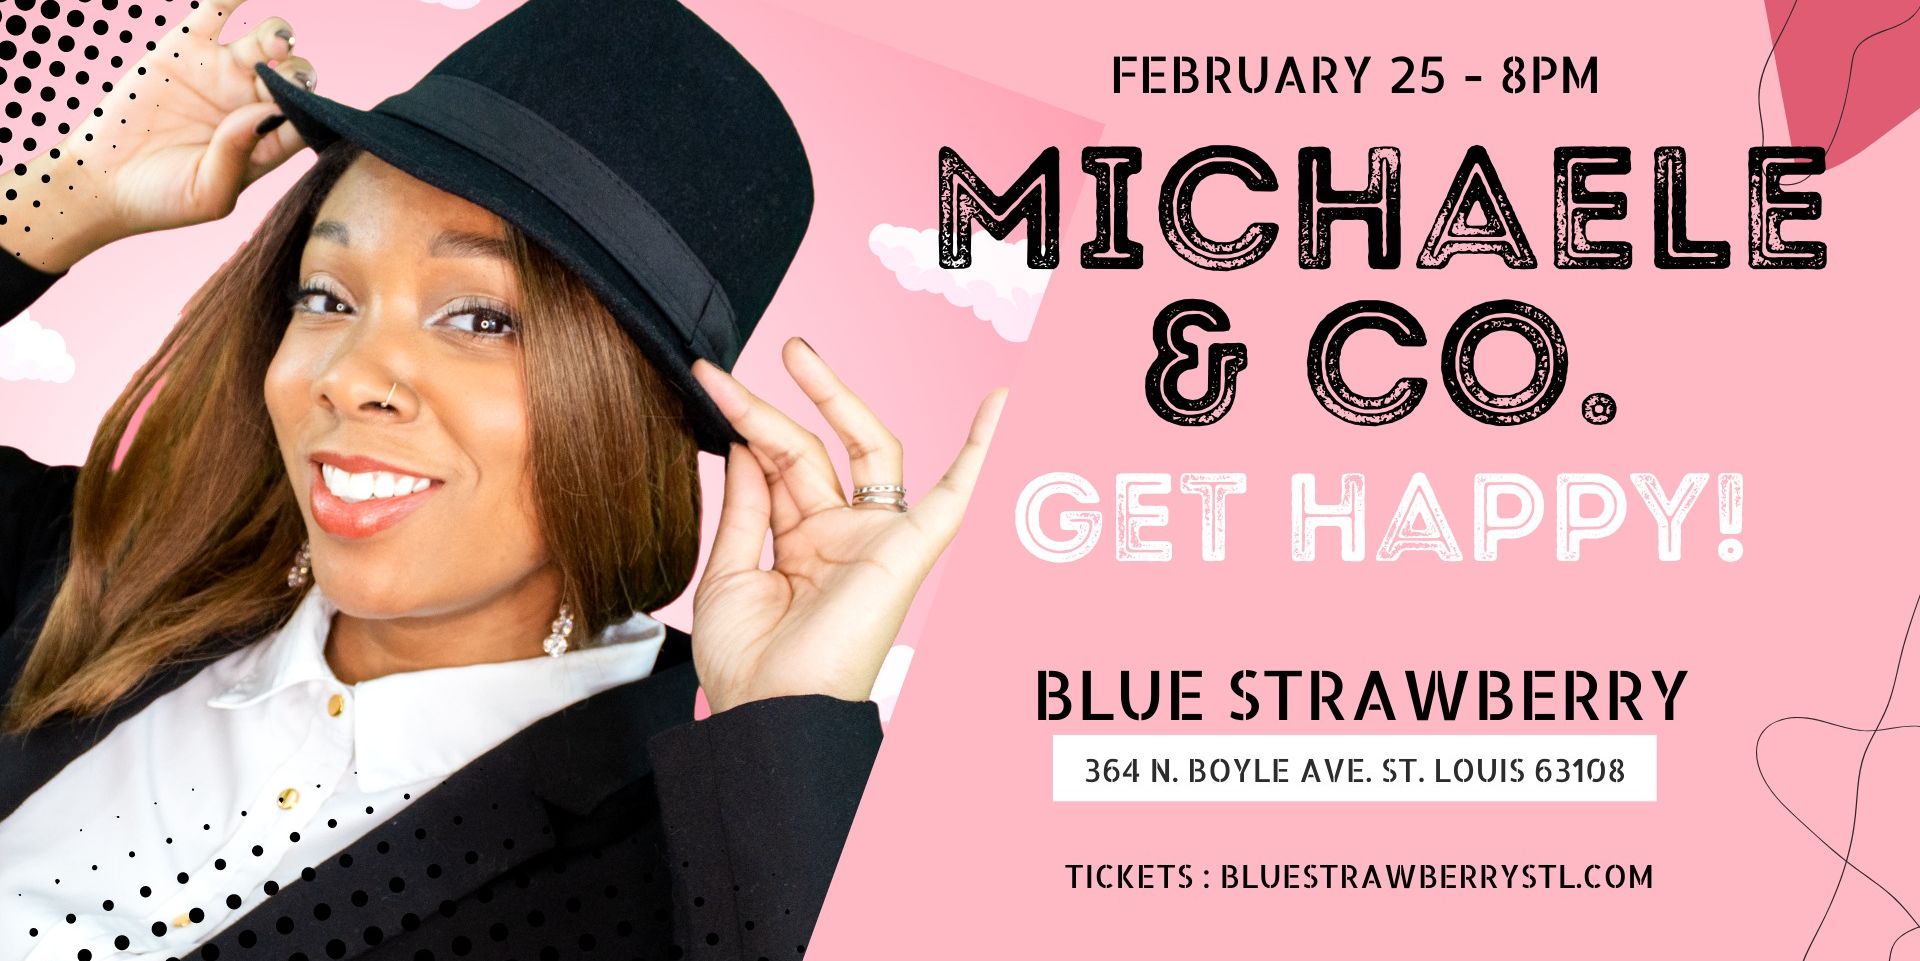 GET HAPPY! with MICHAELE & Co. - LIVE & STREAMING! promotional image